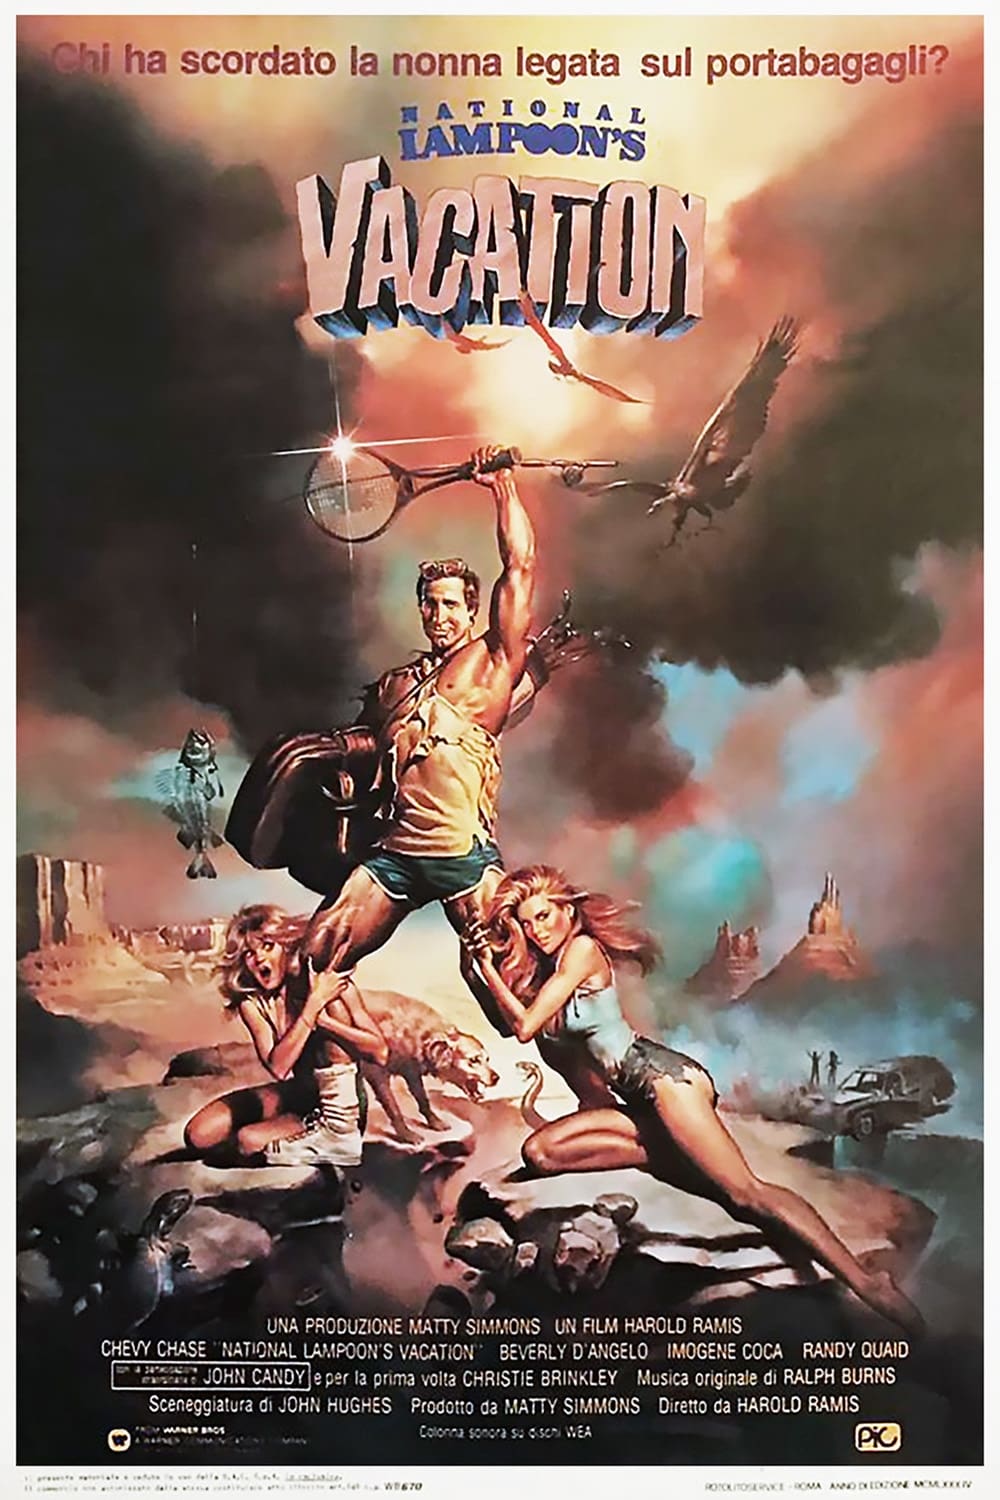 National Lampoon's Vacation film